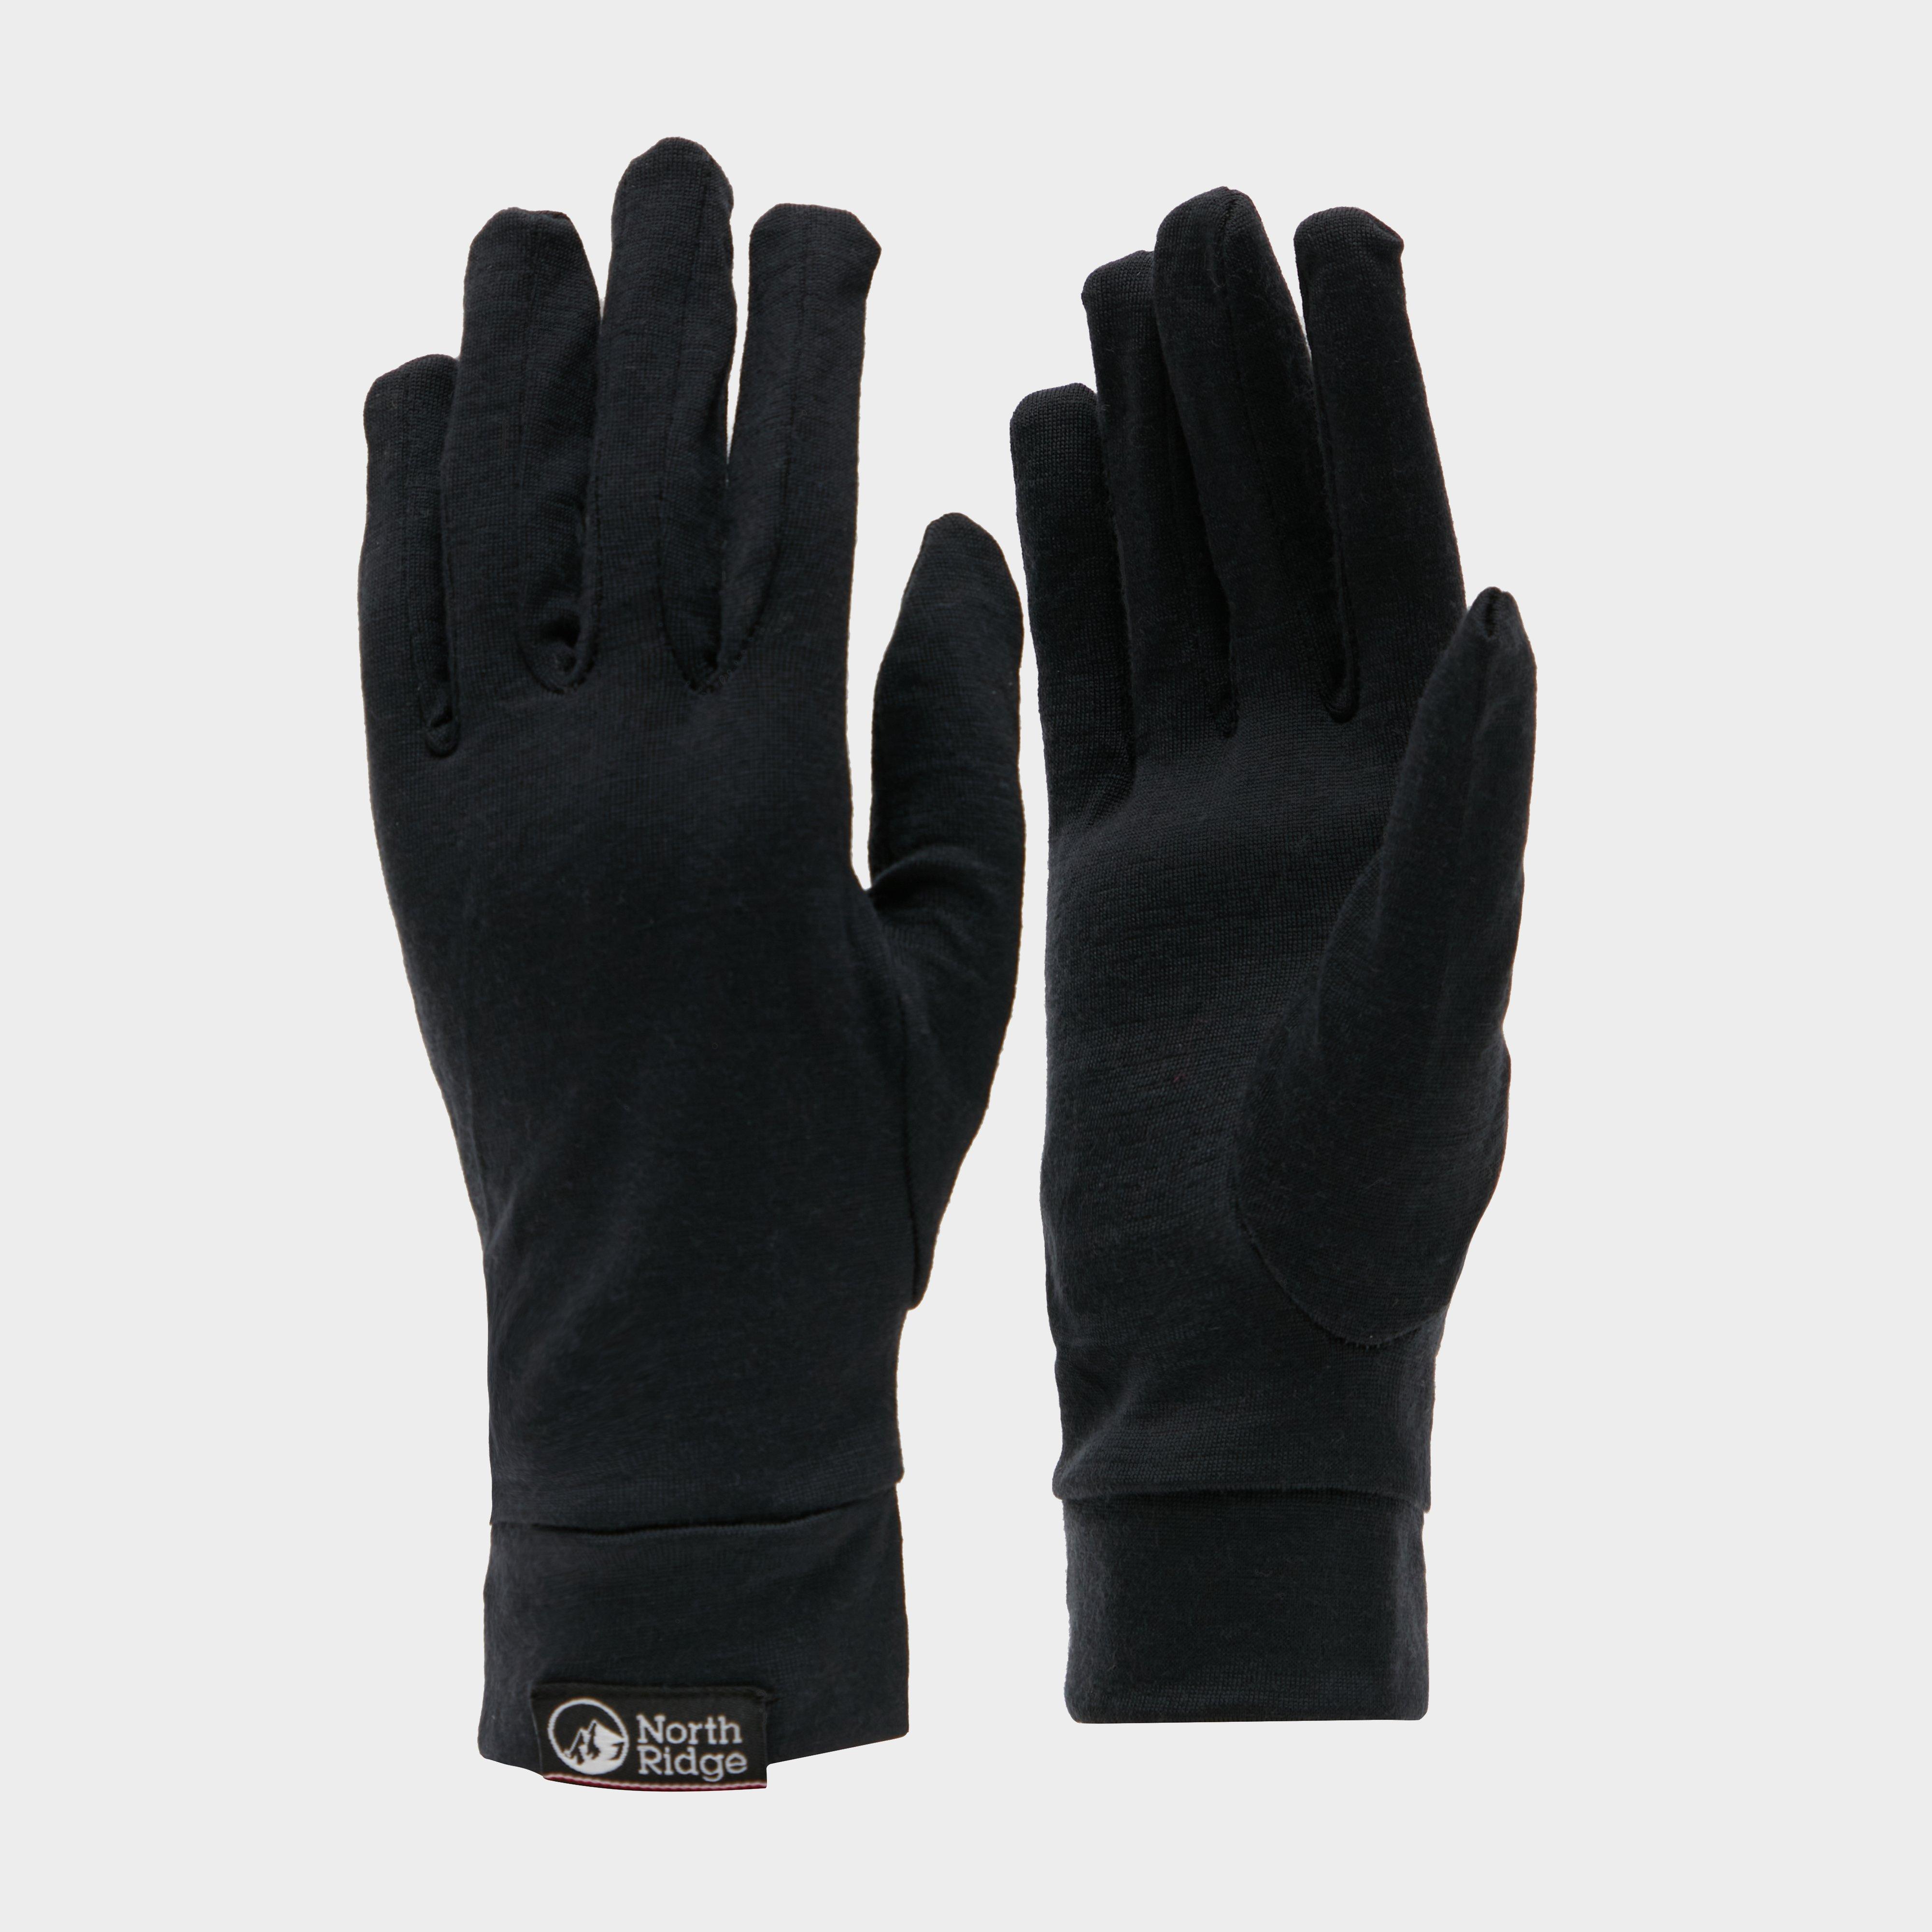 Rab Stretch Knit Gloves Review